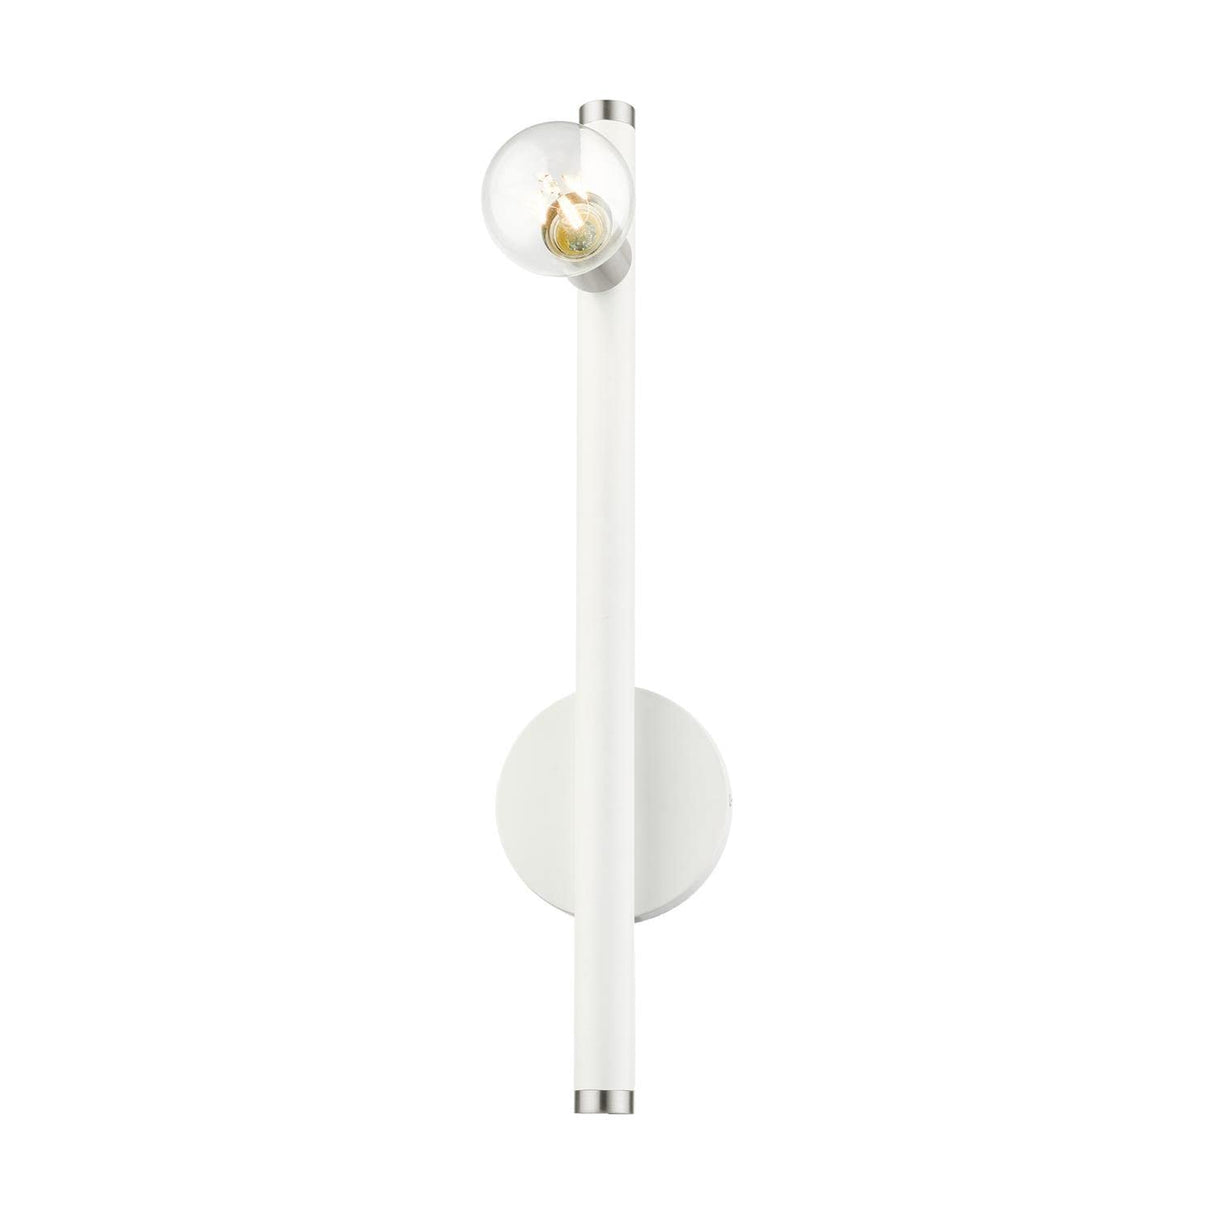 Livex Lighting Bannister 1 Light Wall Sconce White Finish with Brushed Nickel Finish Accents